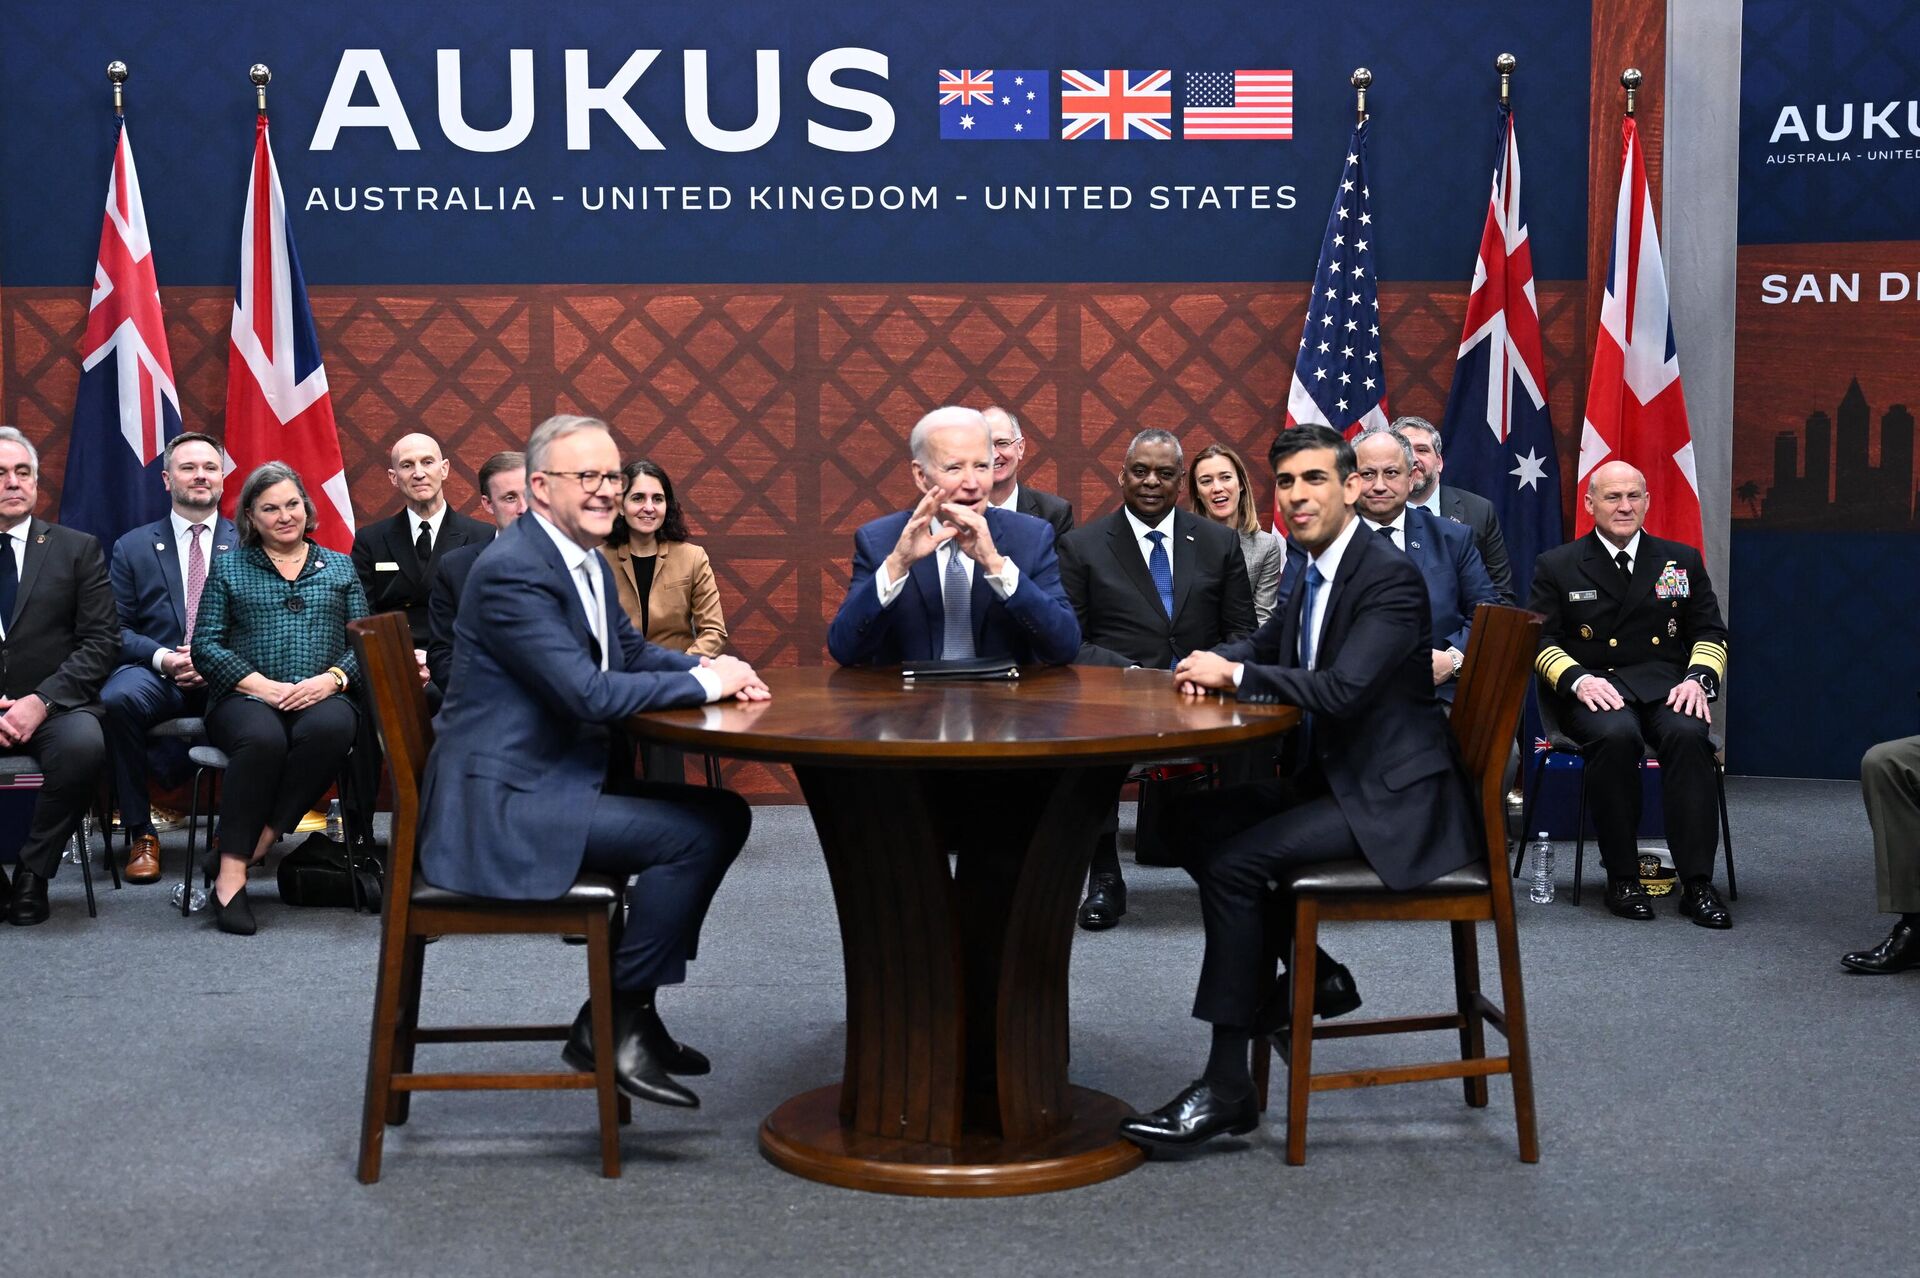 US President Joe Biden (C) participates in a trilateral meeting with British Prime Minister Rishi Sunak (R) and Australia's Prime Minister Anthony Albanese (L) during the AUKUS summit on March 13, 2023, at Naval Base Point Loma in San Diego California - Sputnik International, 1920, 19.03.2023